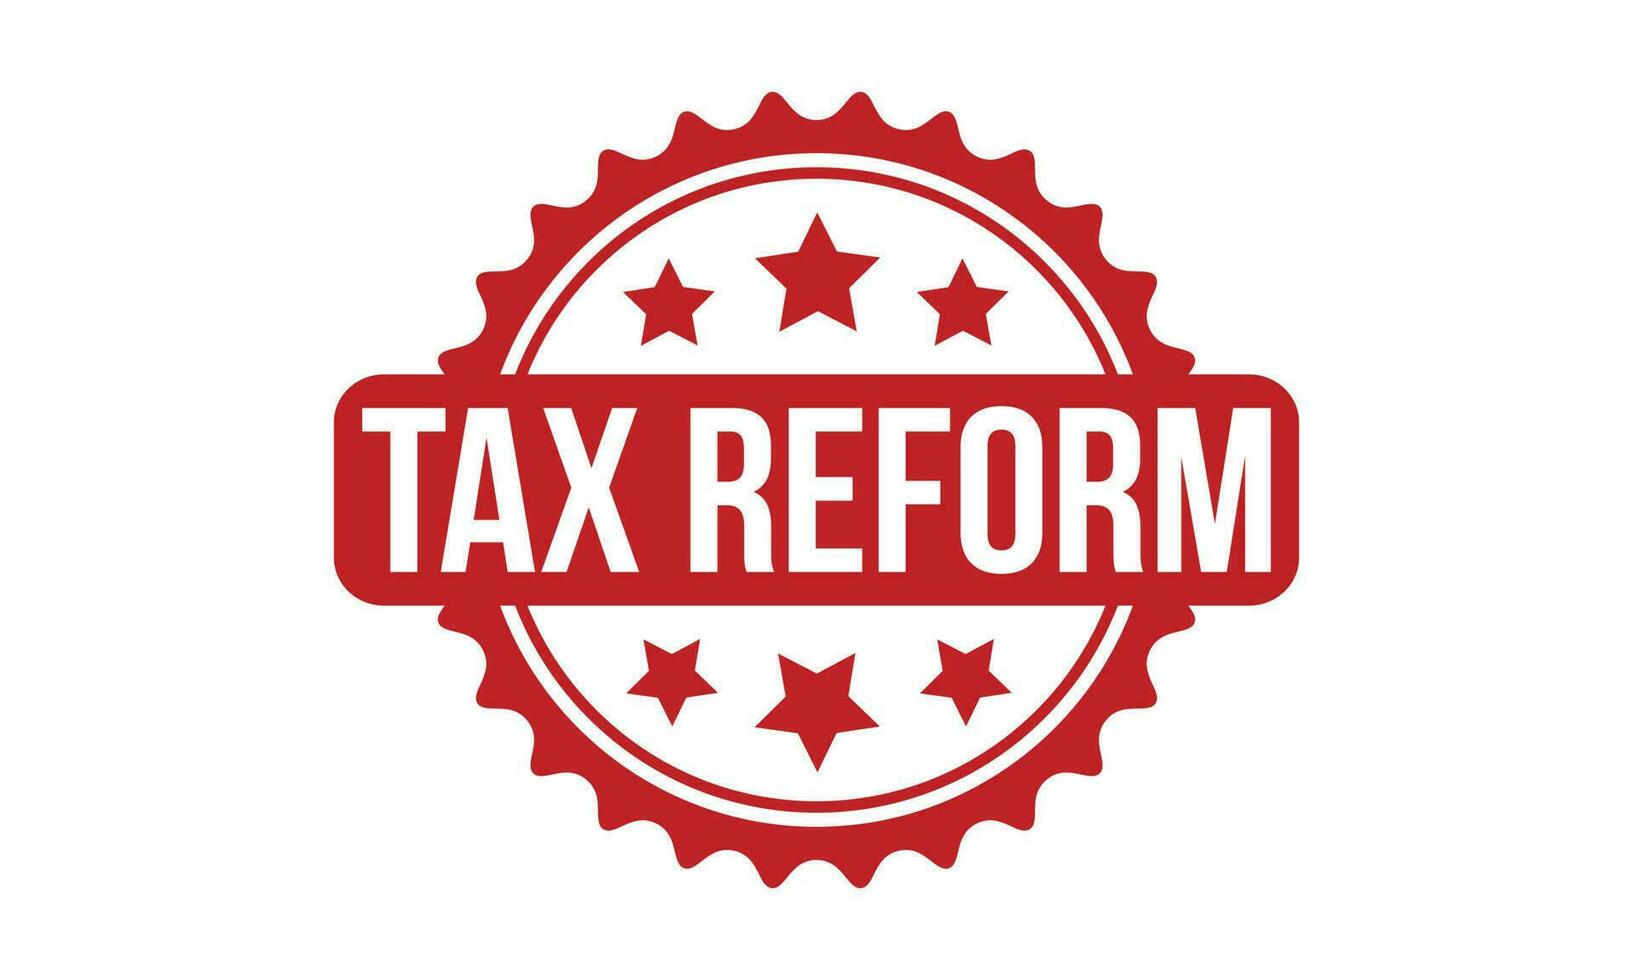 Tax Reform Rubber Stamp Seal Vector